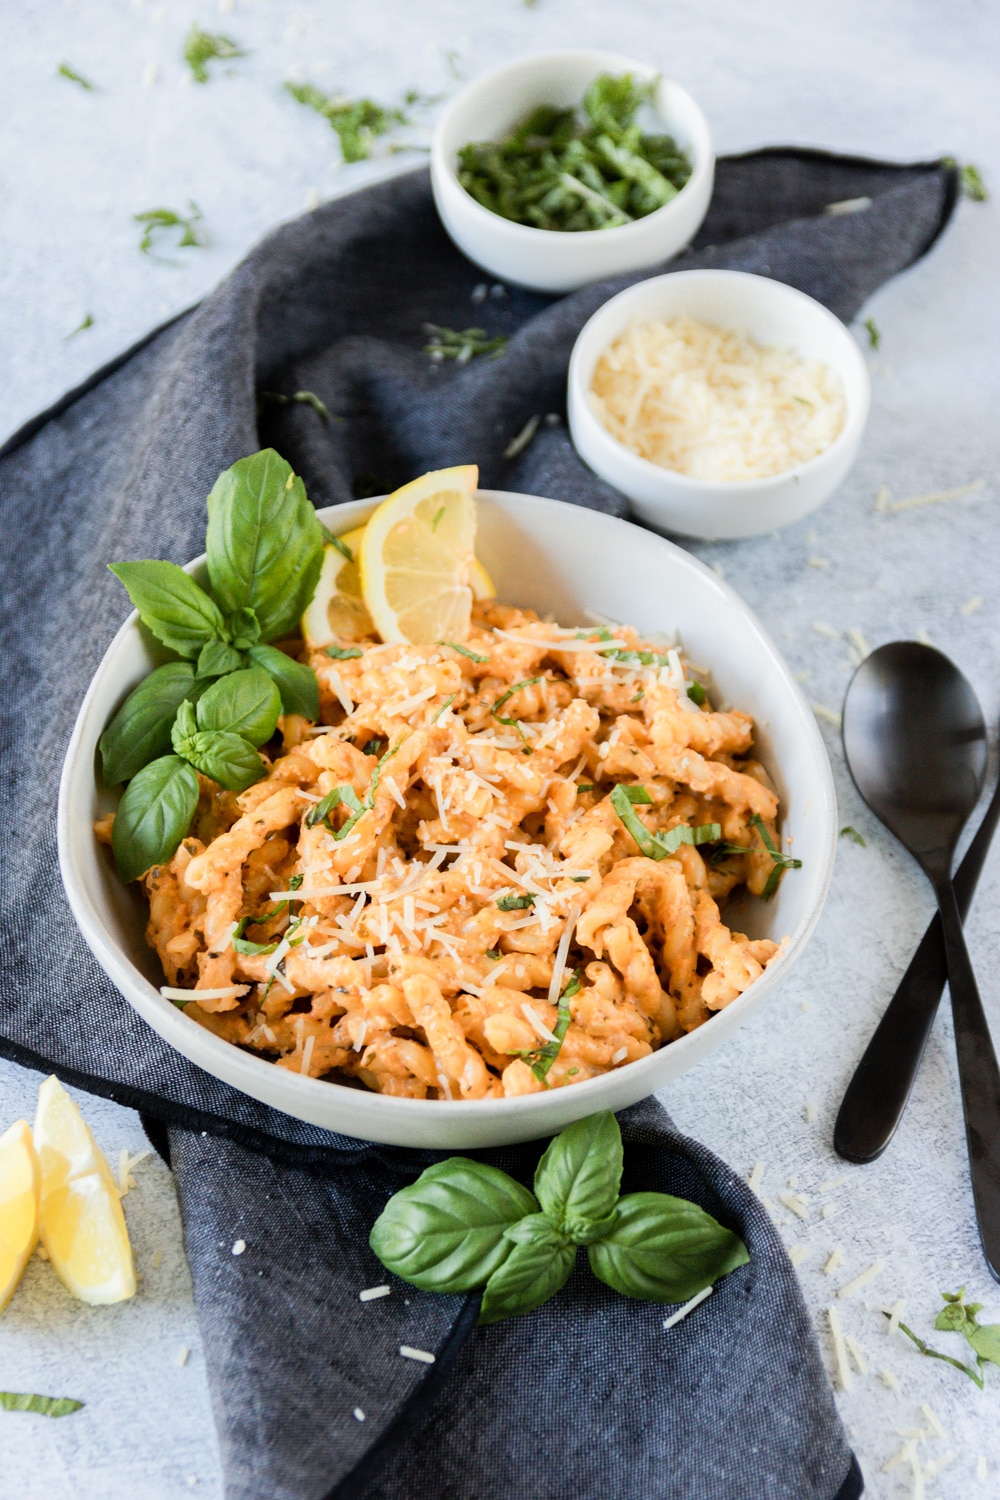 Roasted Red Pepper & Goat Cheese Pasta